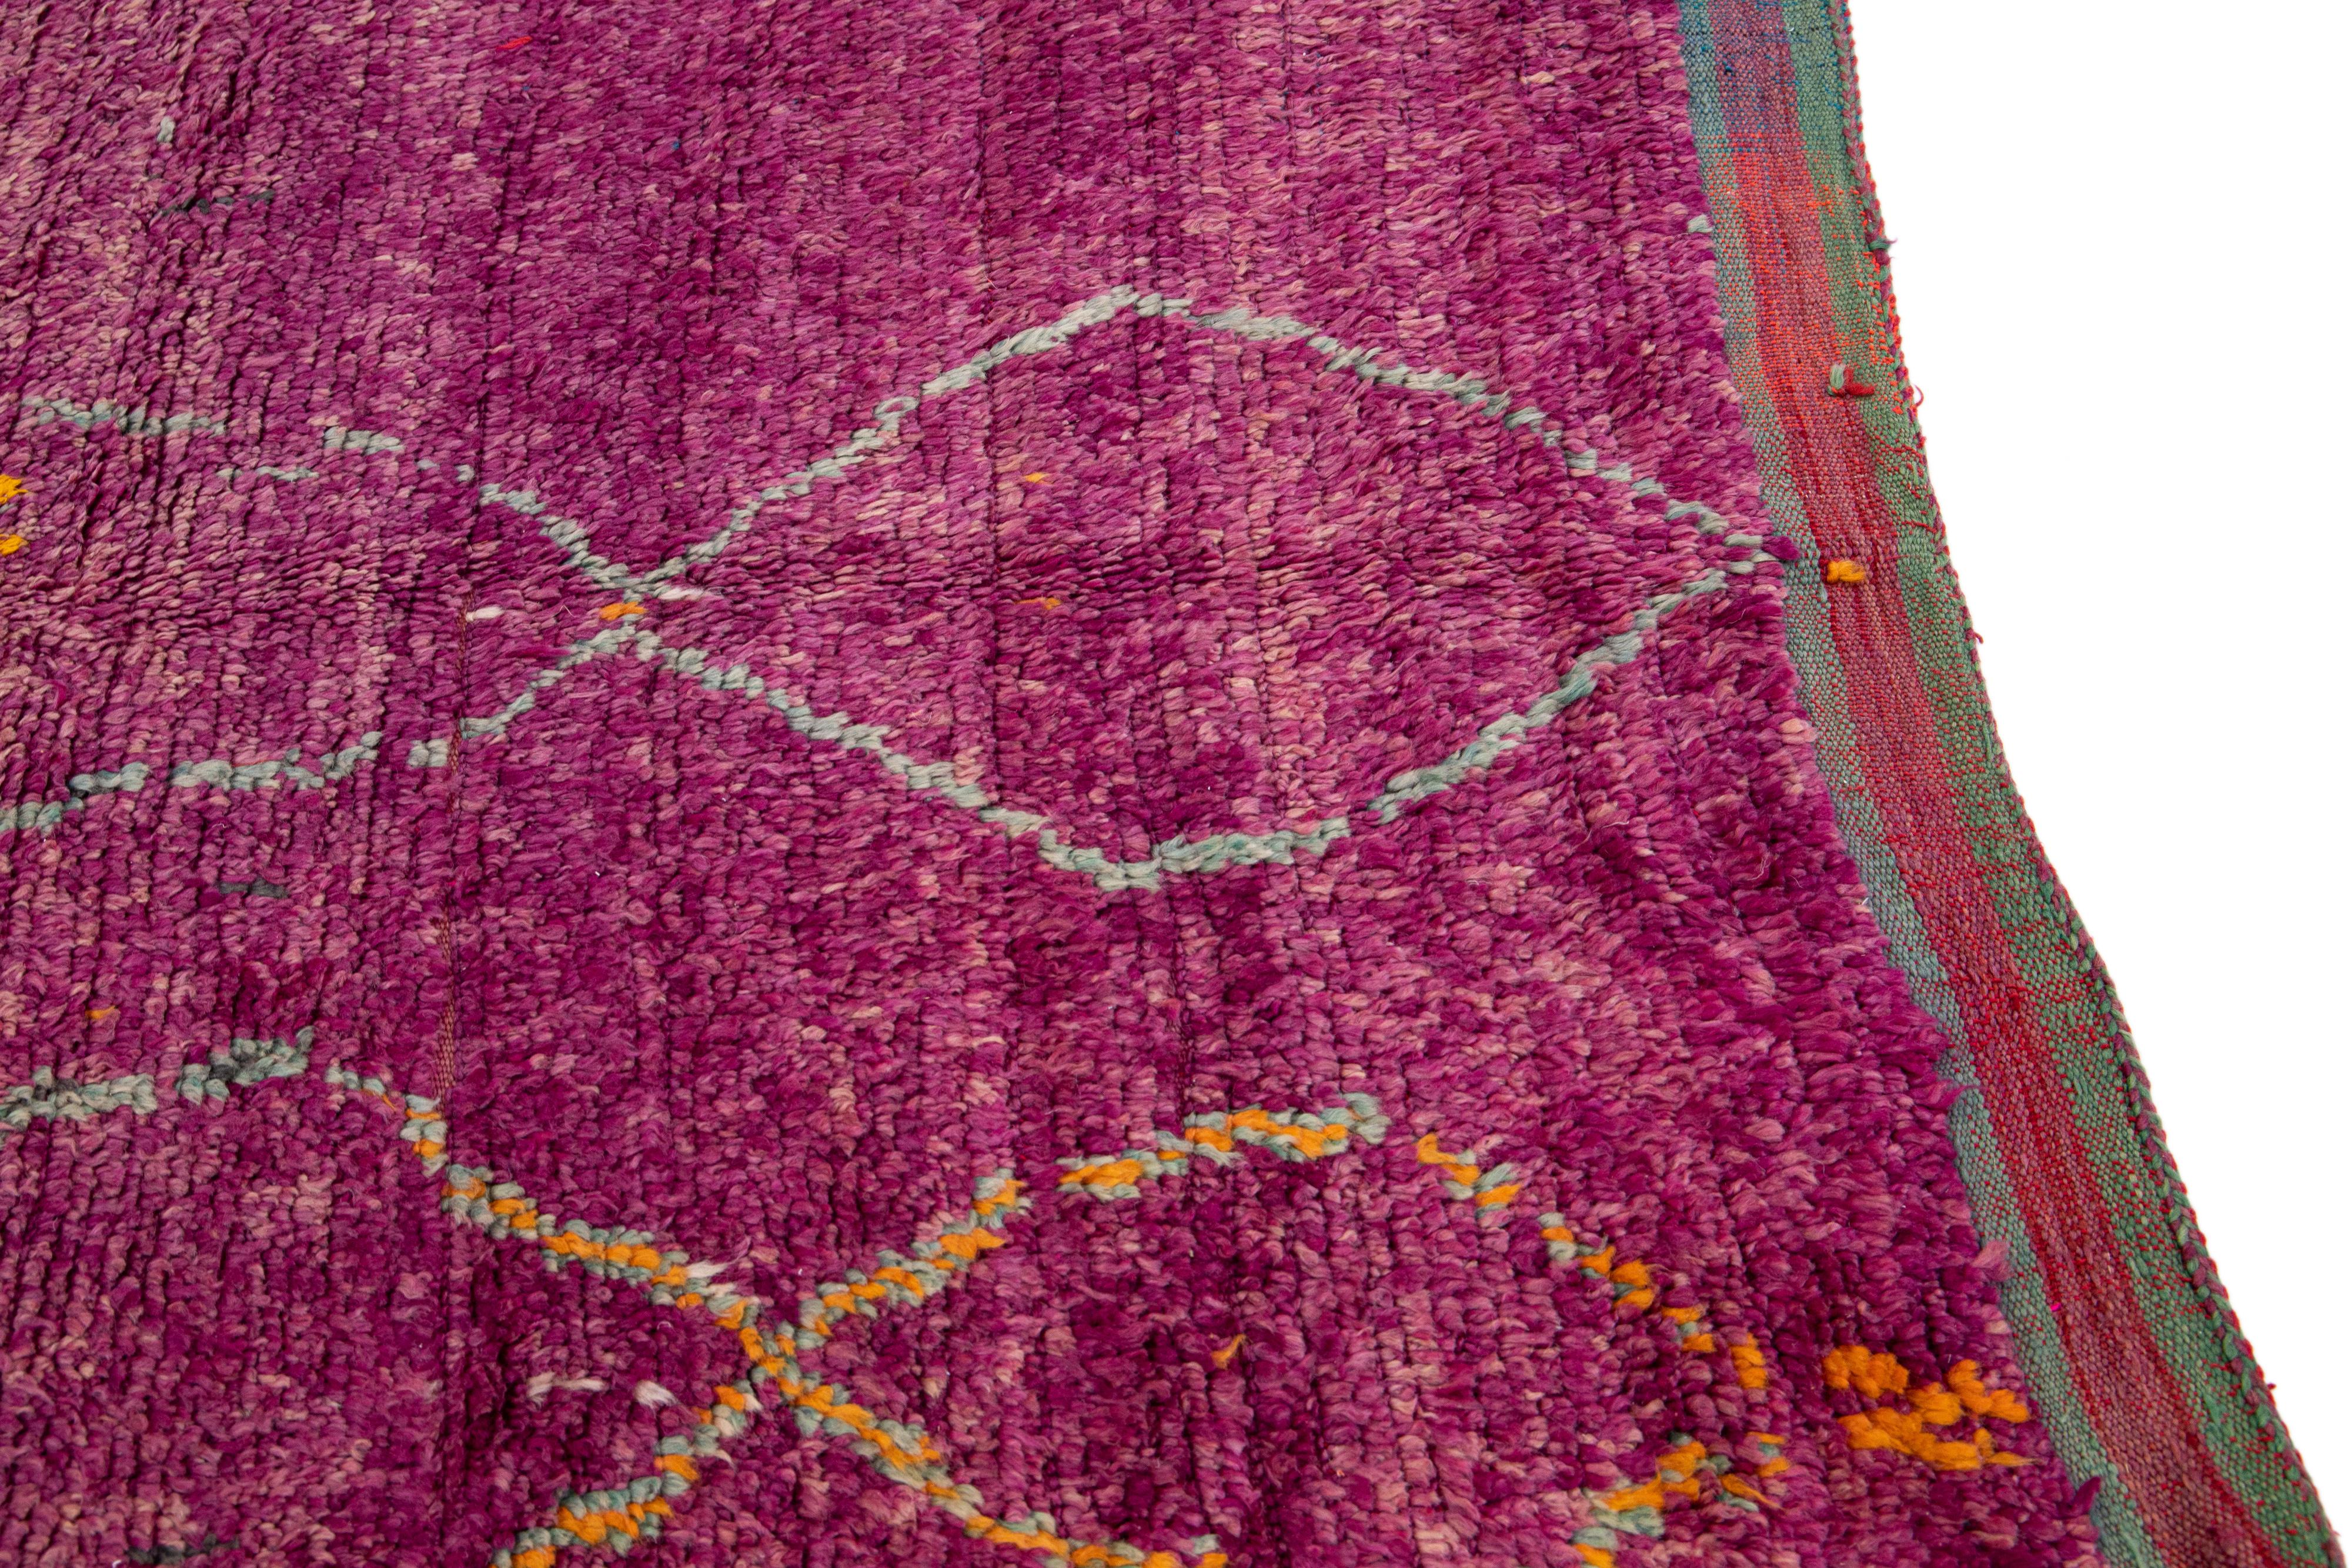 Purple Vintage Moroccan Handmade Tribal Wool Rug In Excellent Condition For Sale In Norwalk, CT